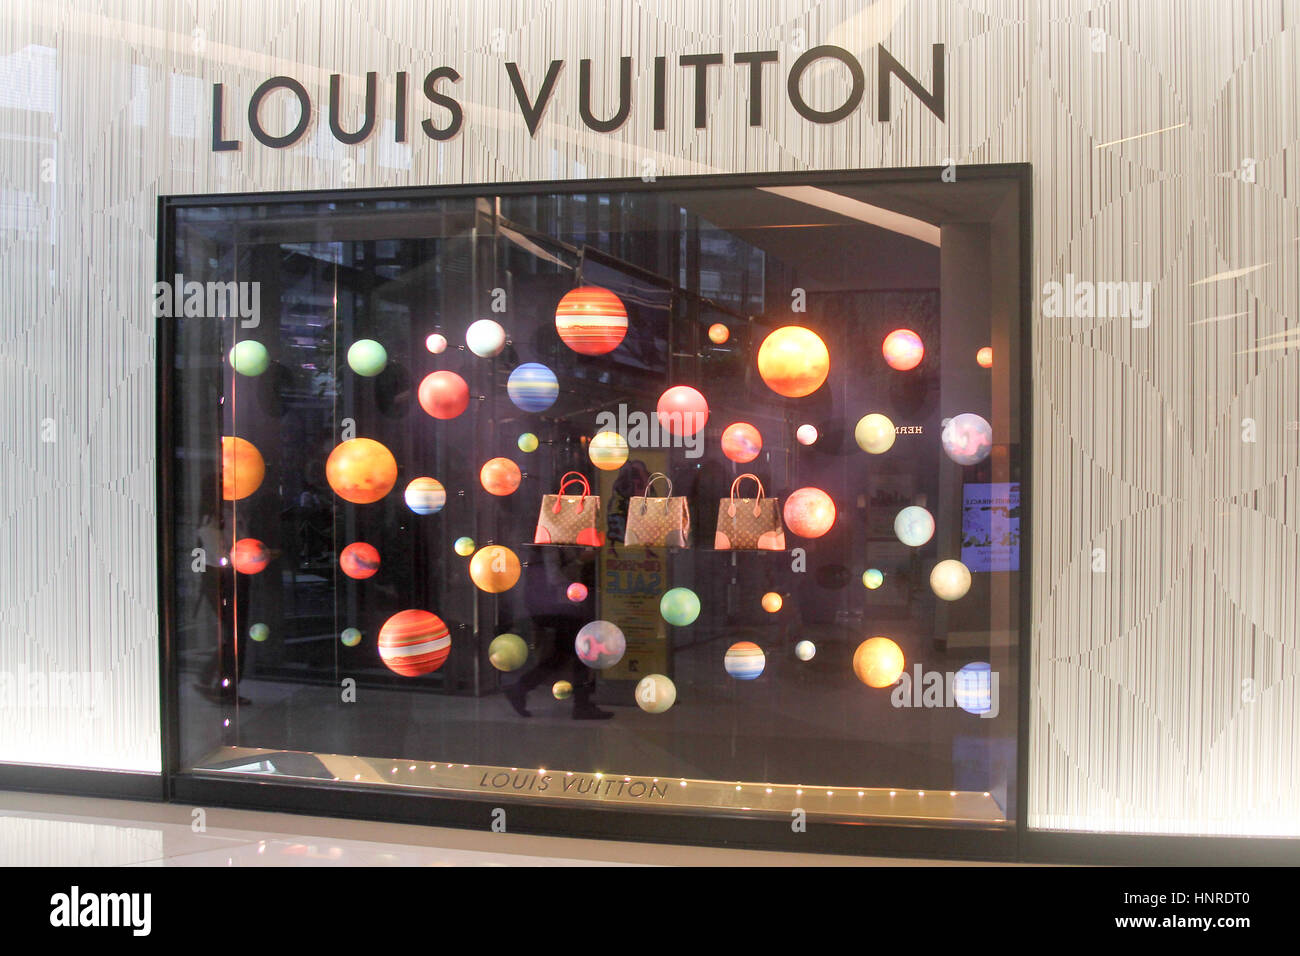 Louis Vuitton store window in mall in Bangkok, Thailand Stock Photo: 133896112 - Alamy